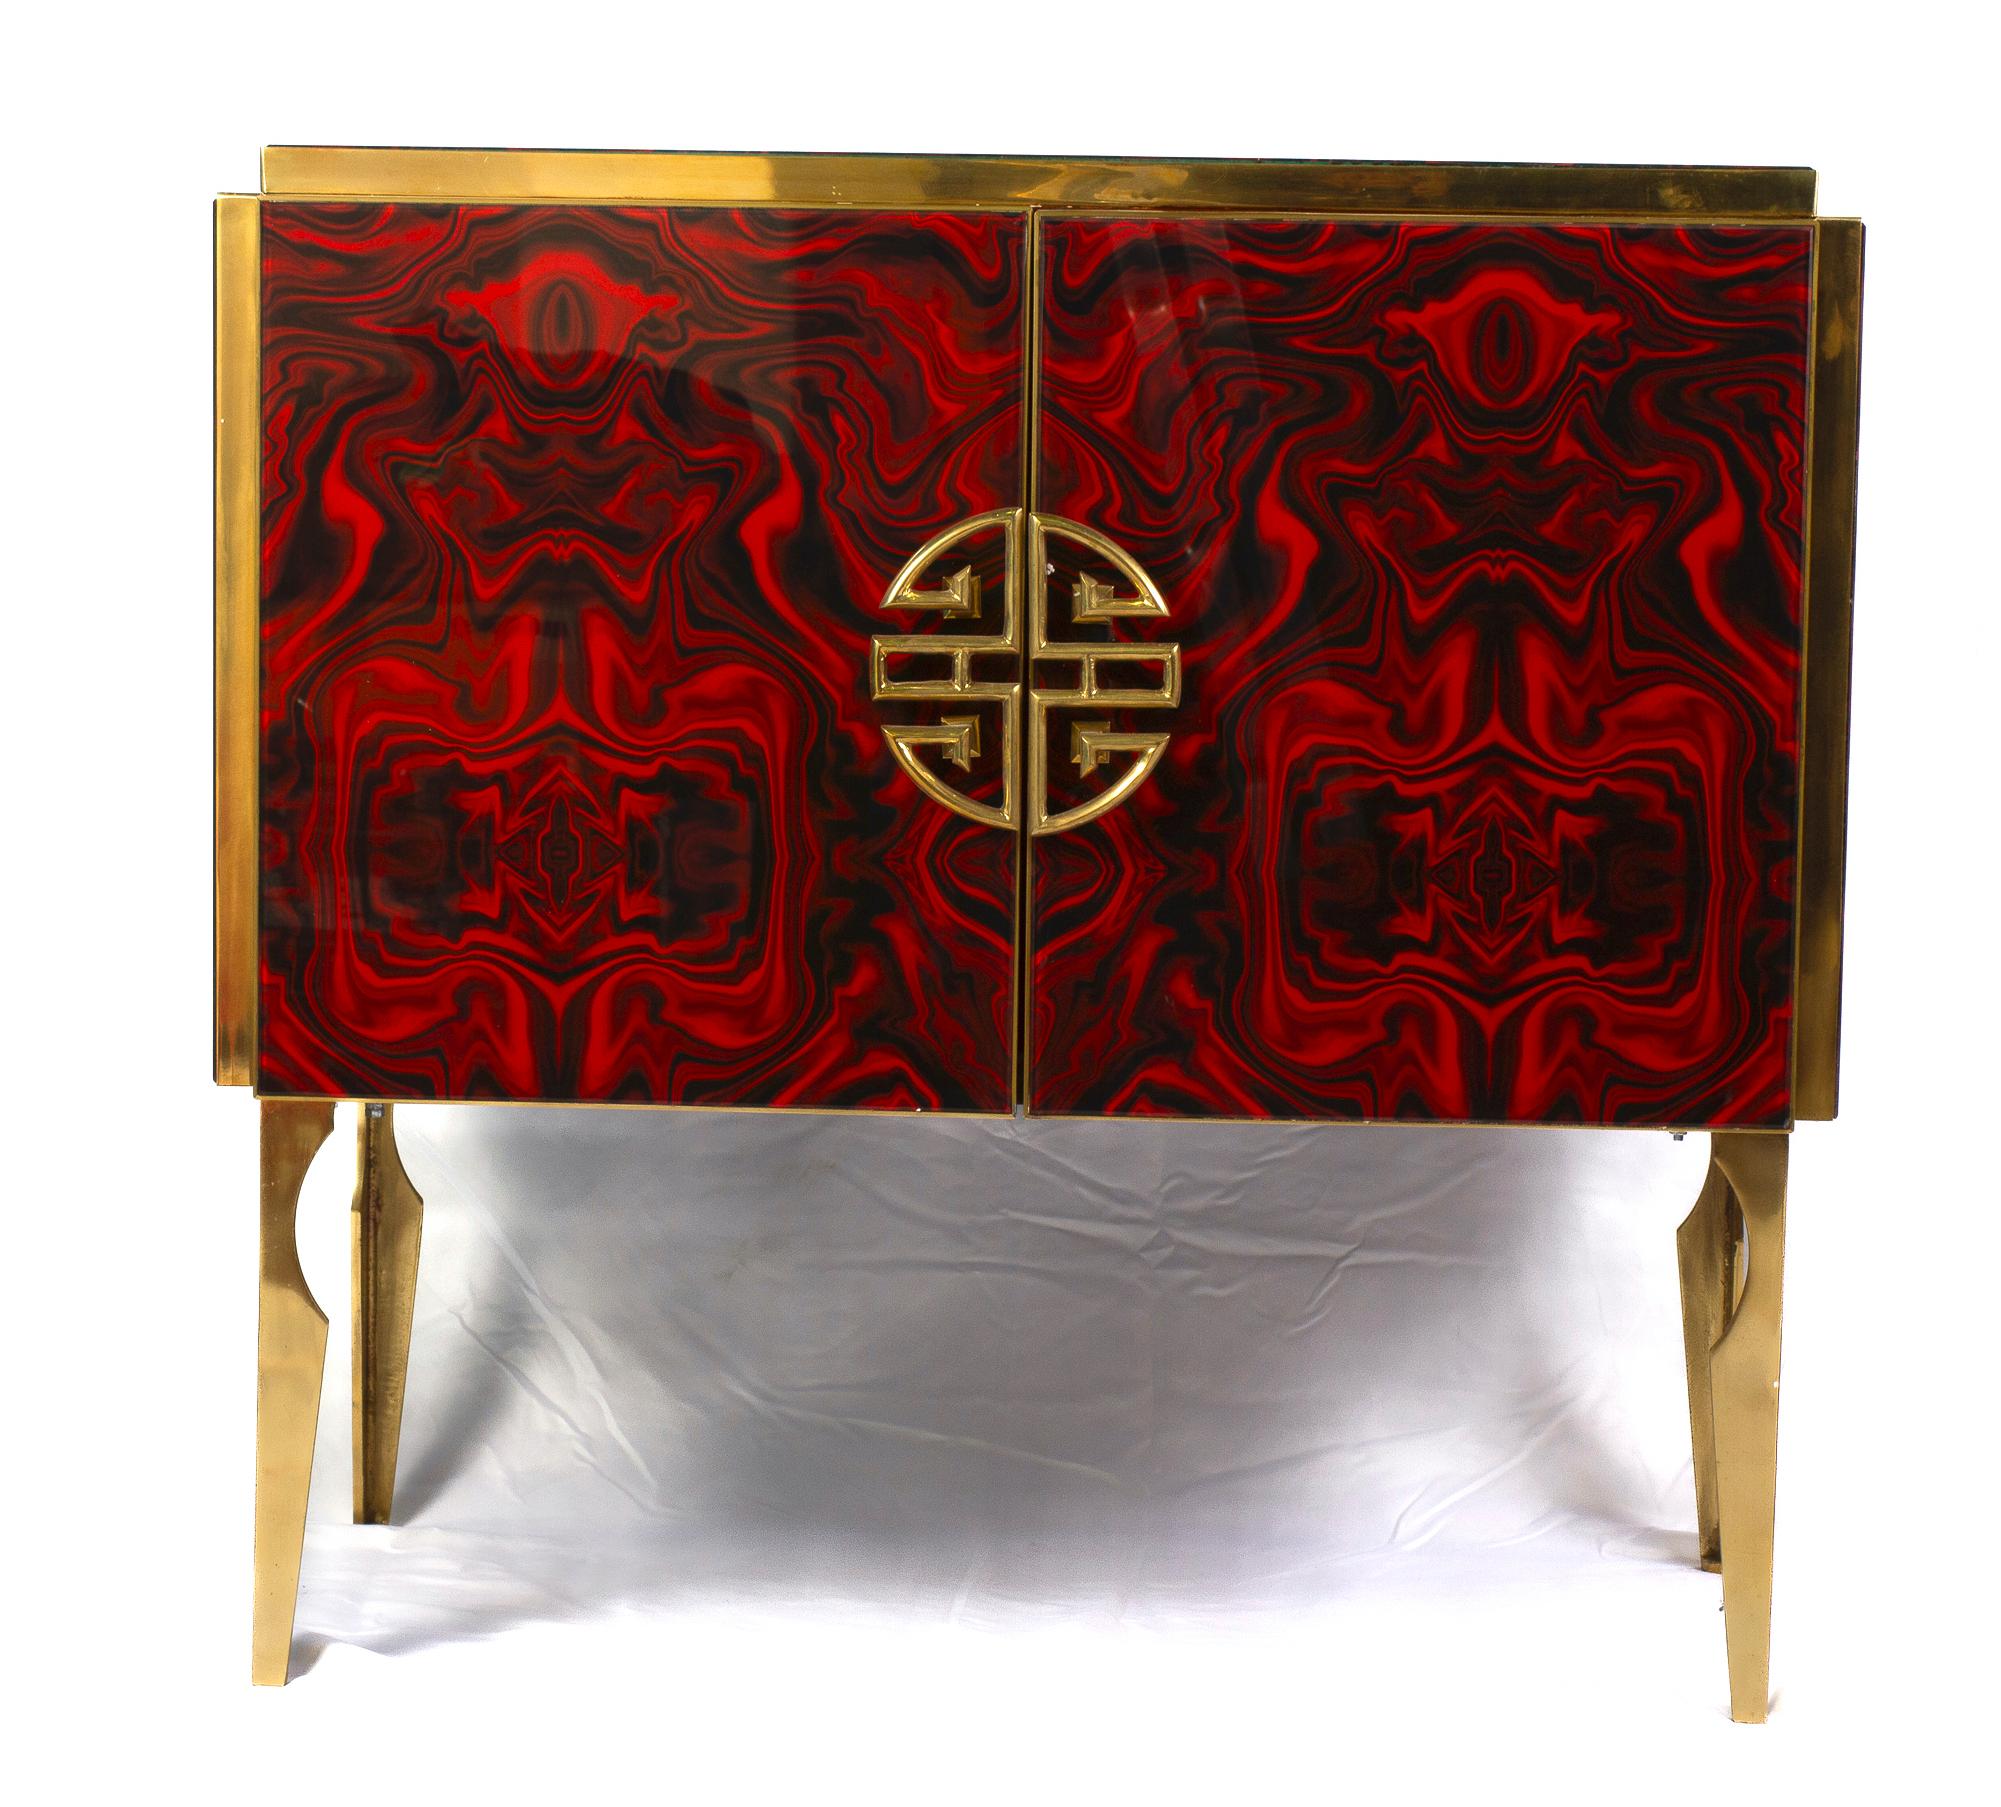 Midcentury Style Brass and Red Fantasy Murano Glass Bar Cabinet, 2020 For Sale 1